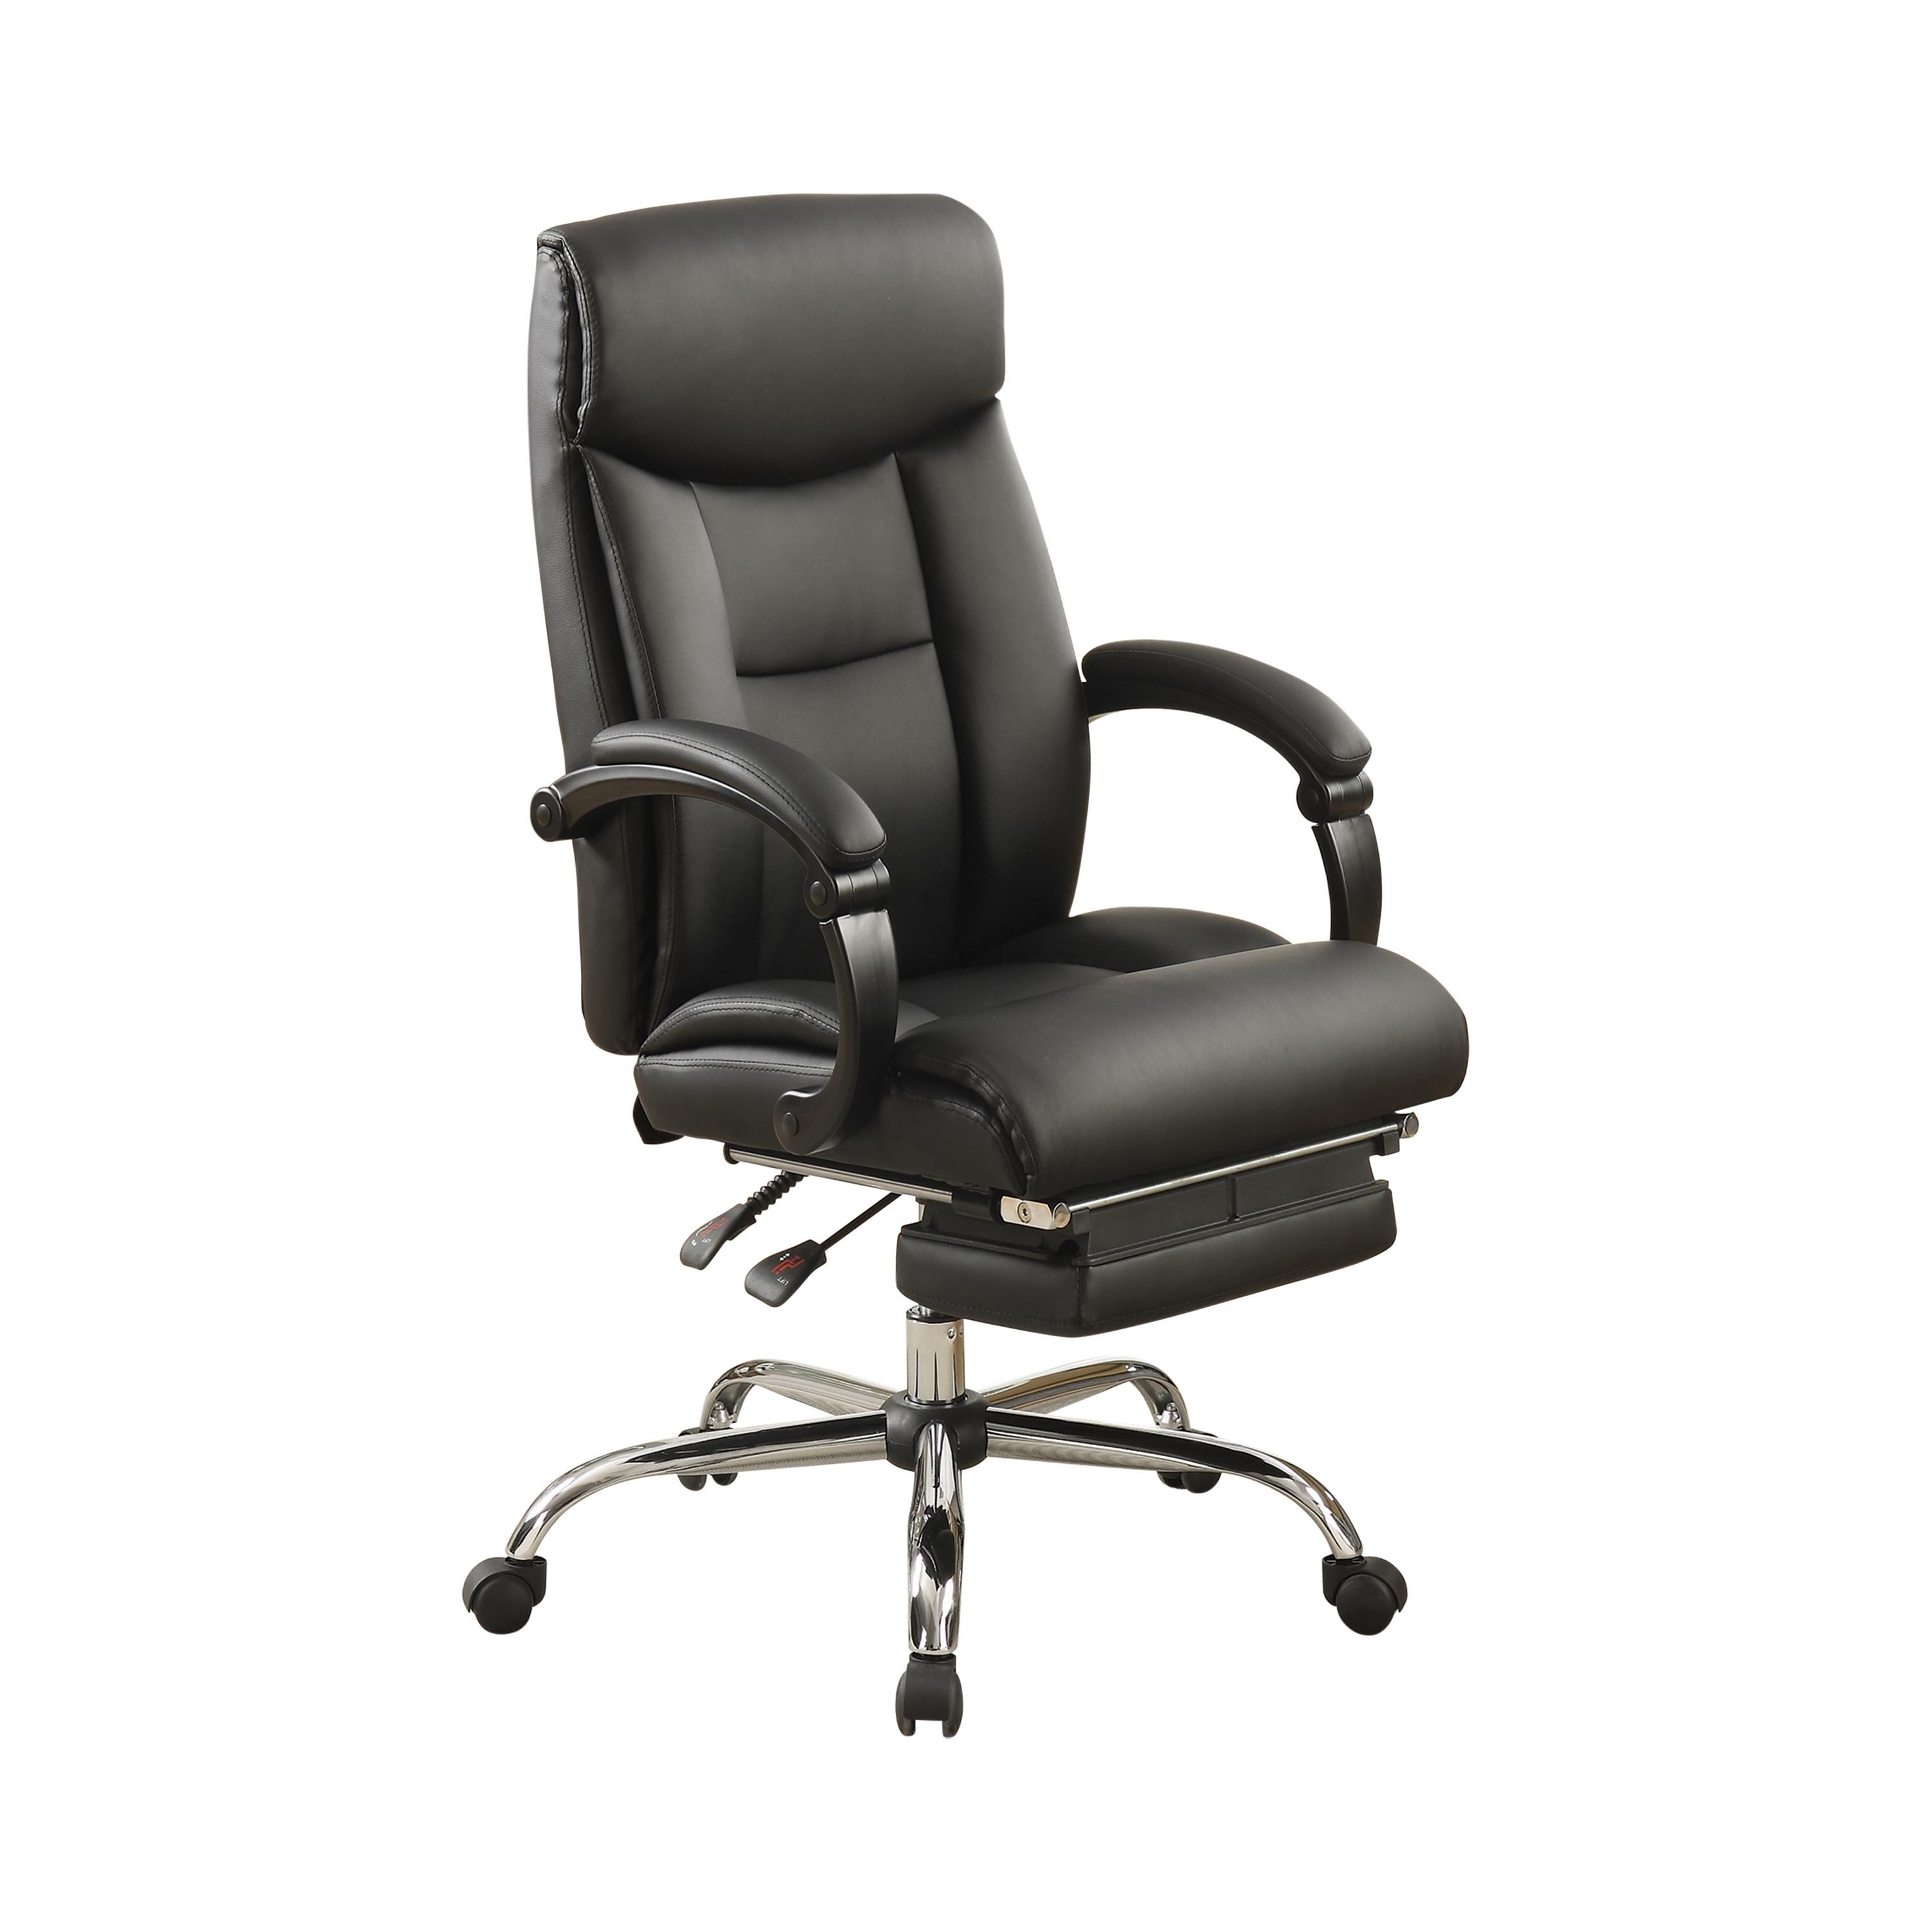 Modern Office Chair 801318 801318 in Black Leatherette